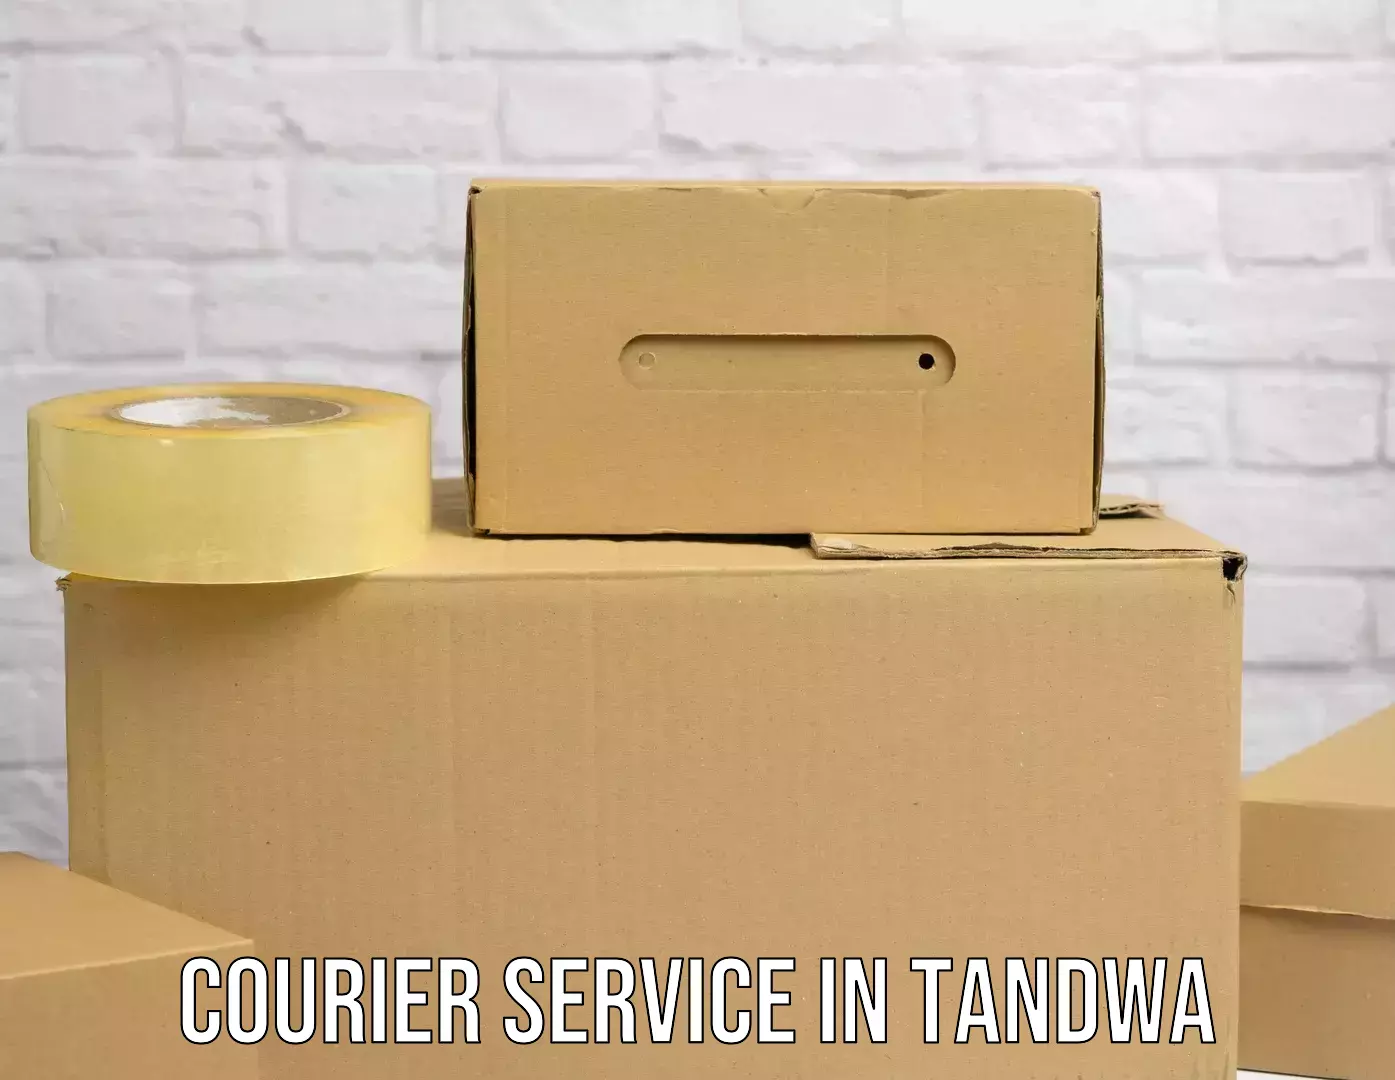 Scheduled delivery in Tandwa